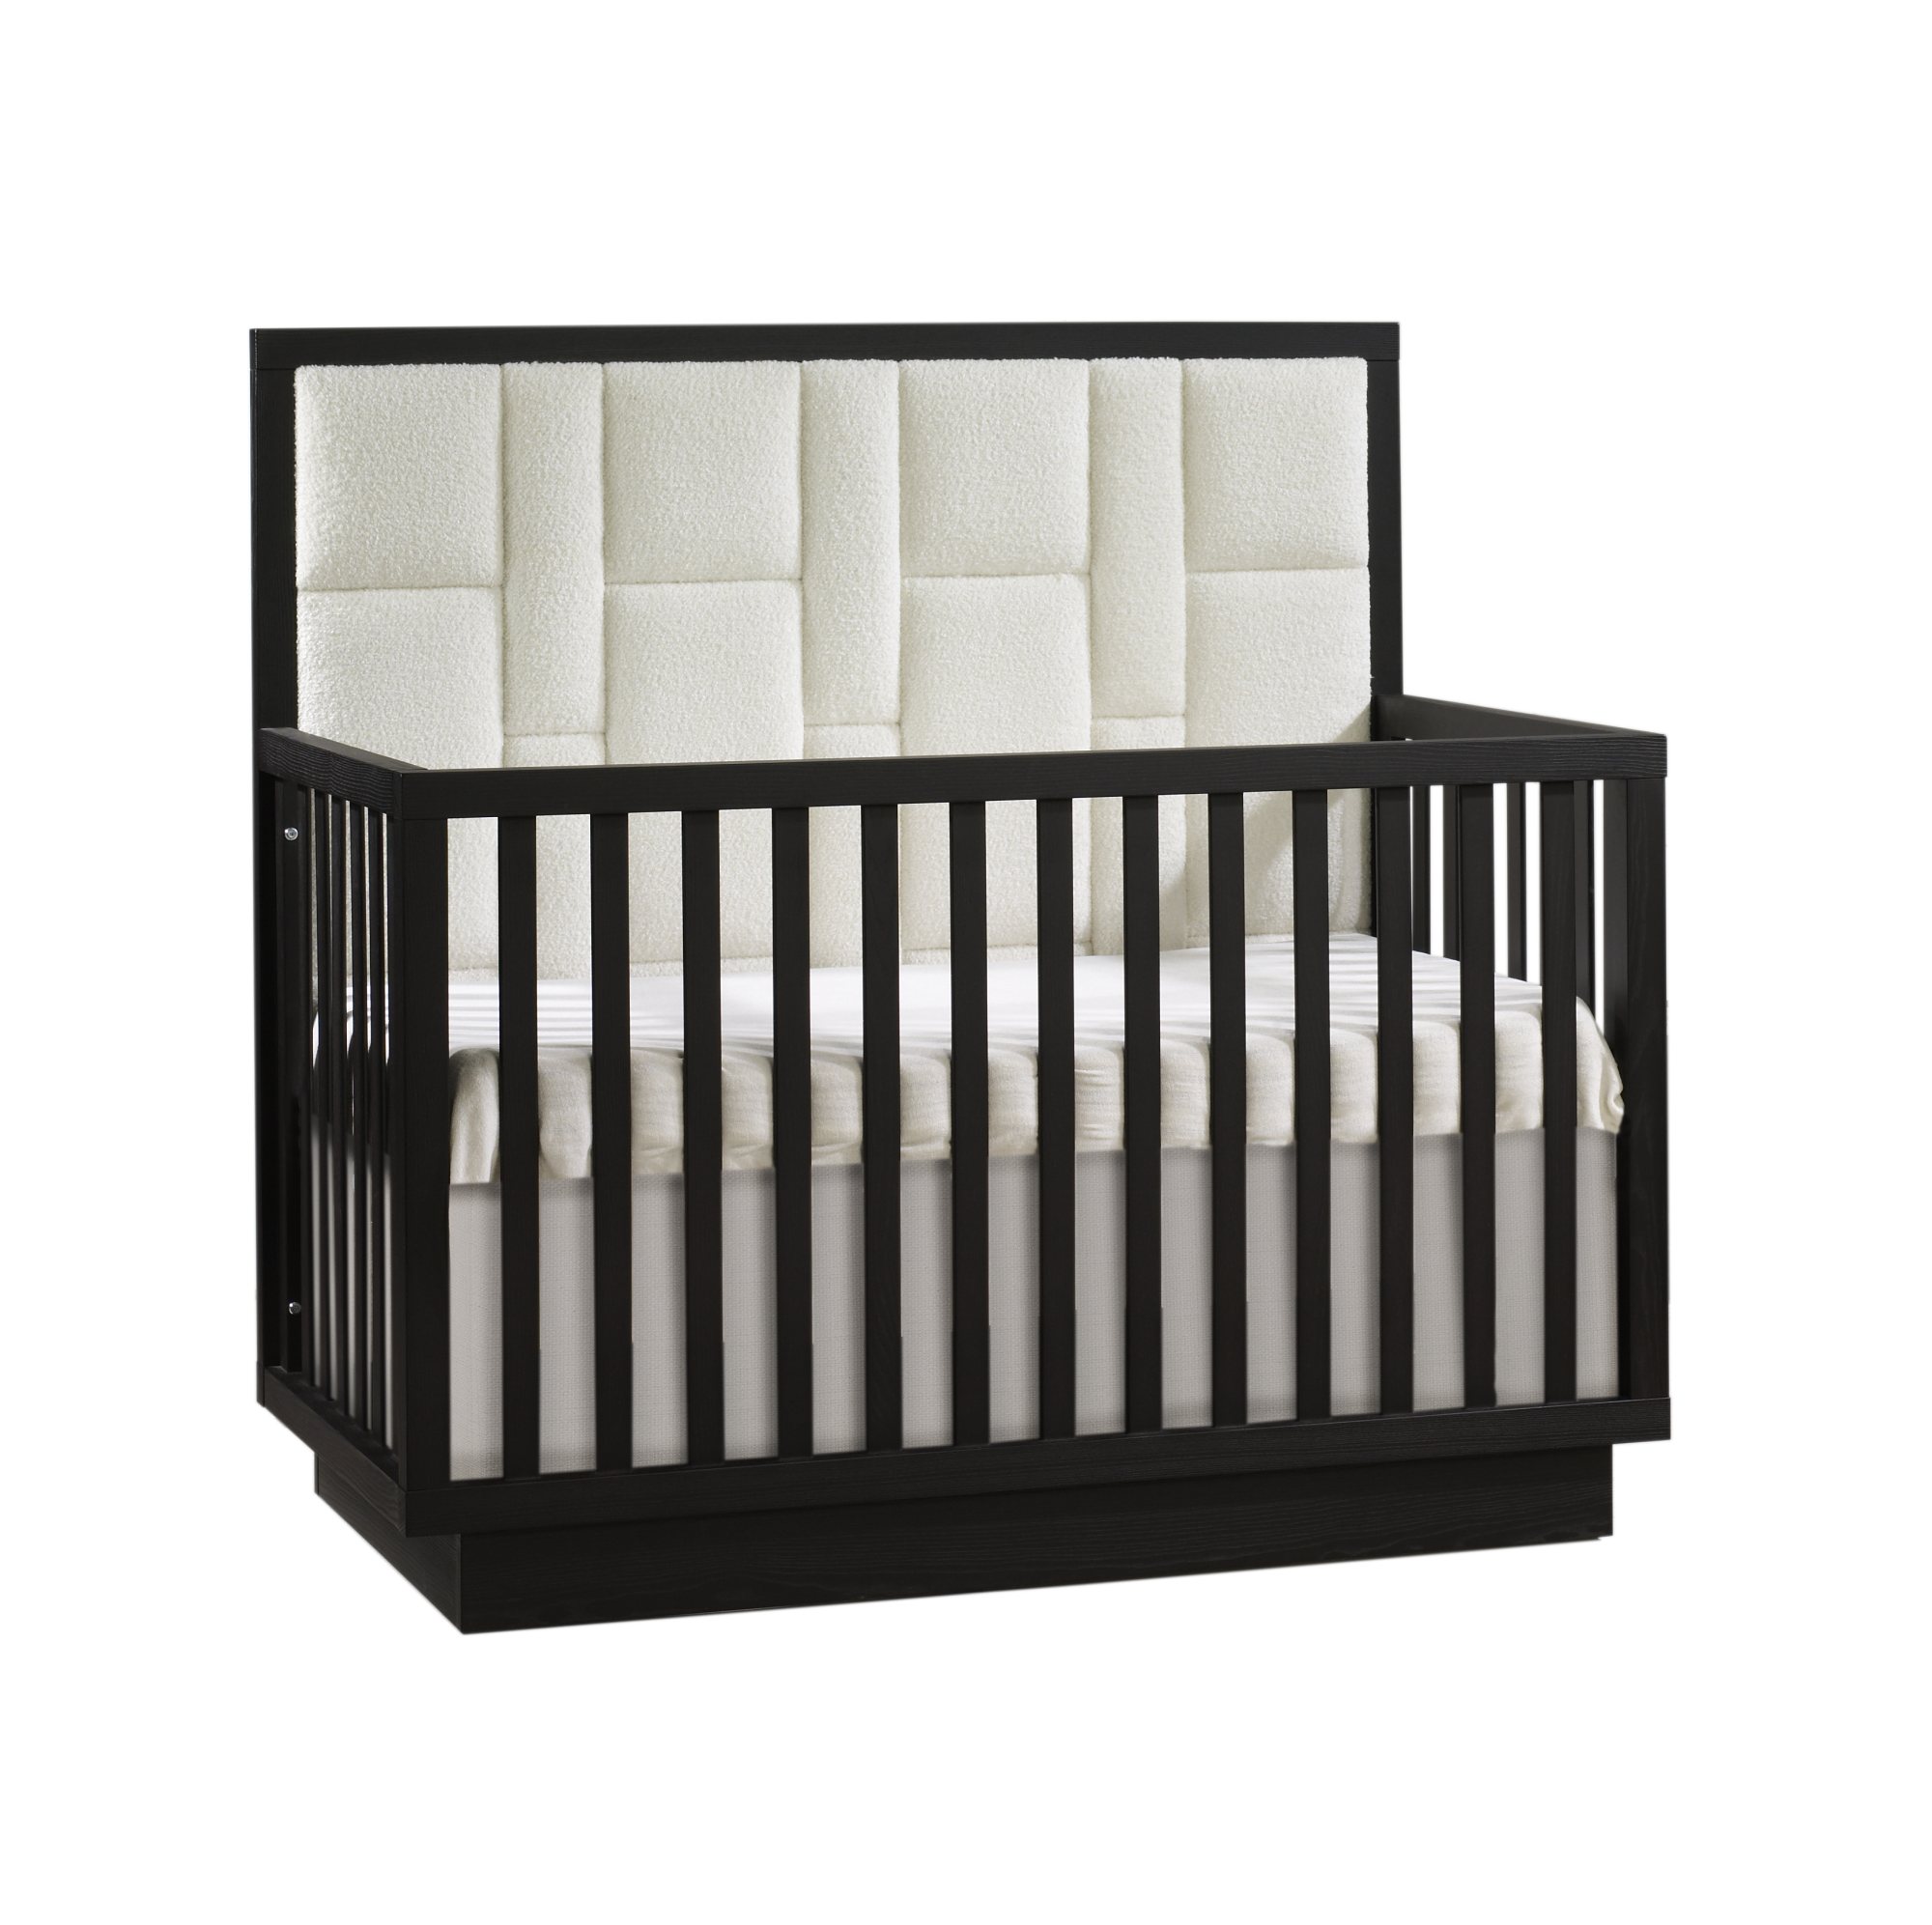 Como 5-in-1 Convertible Crib with Geometric Upholstered Headboard panel in Dusk